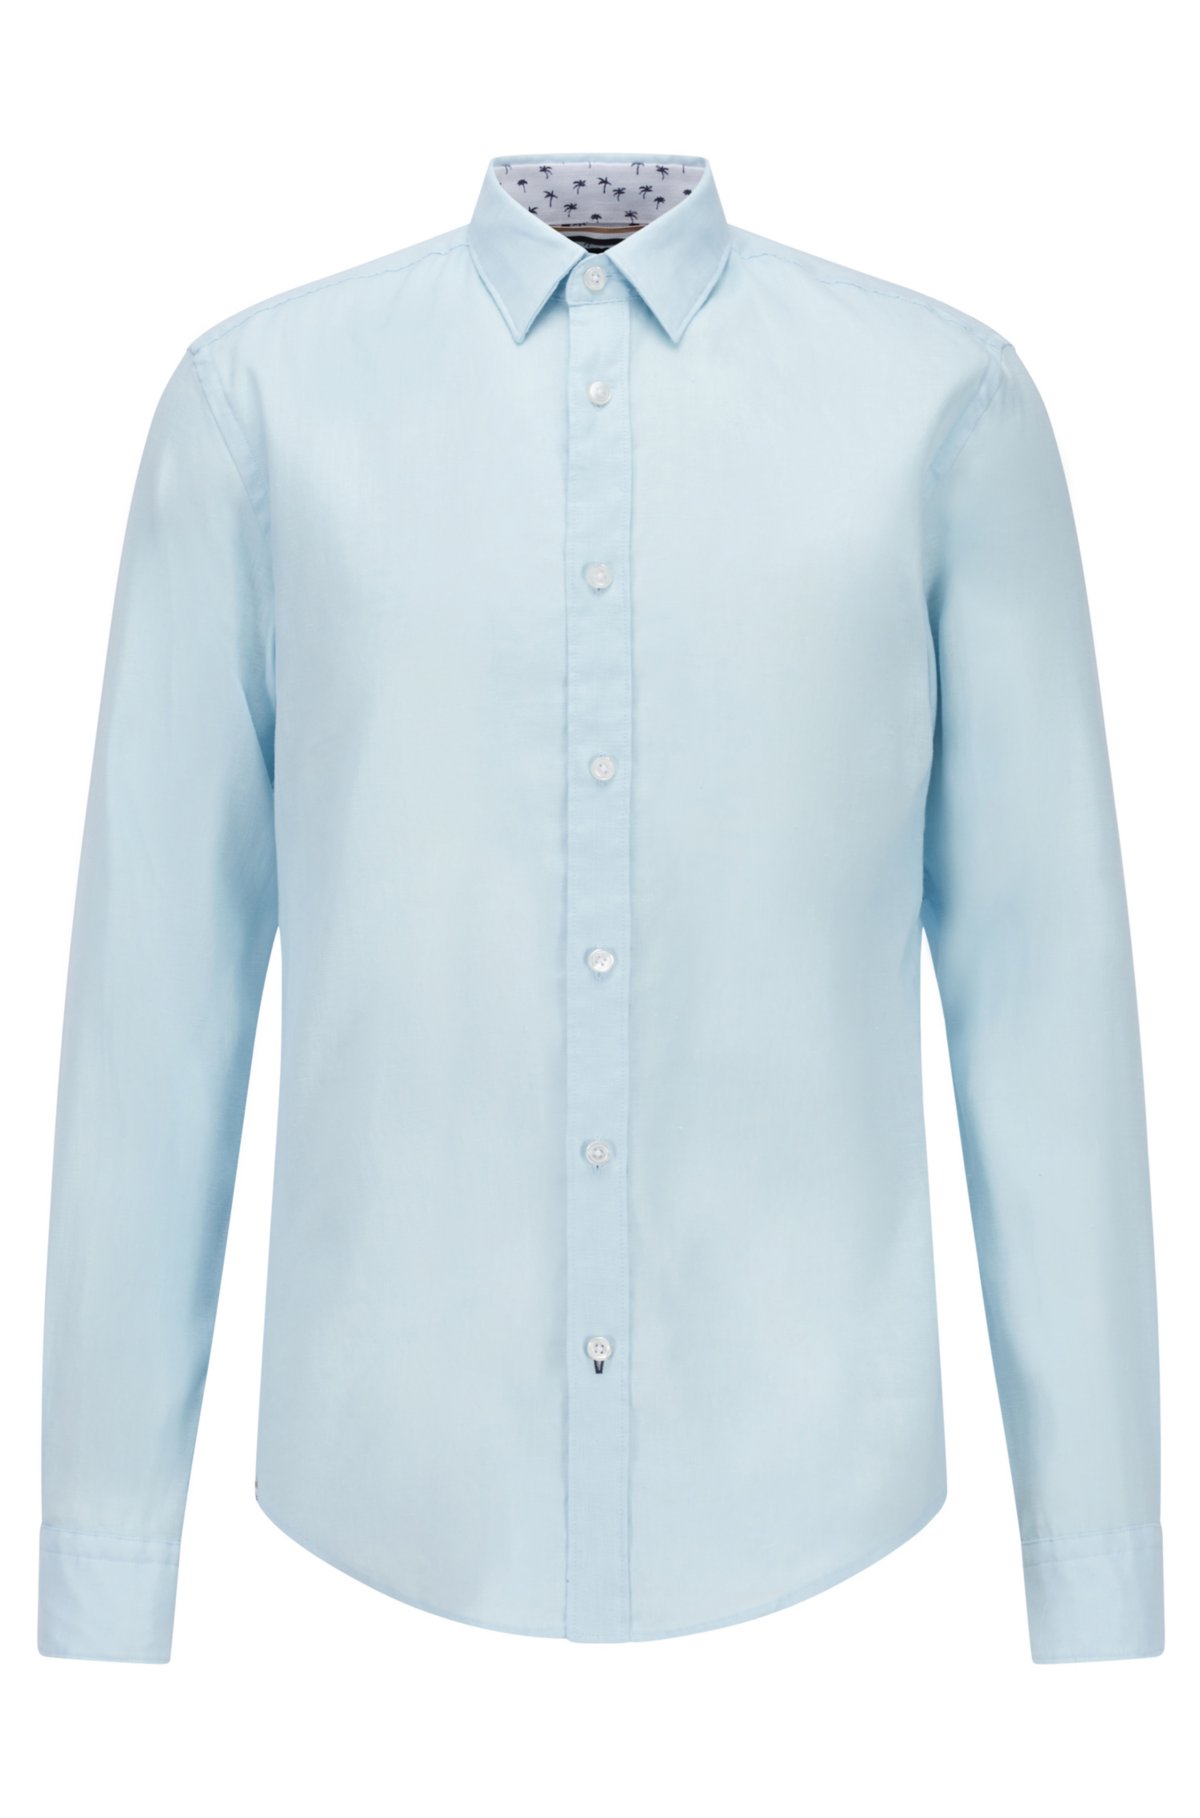 Signature Long-Sleeved Shirt - Men - Ready-to-Wear